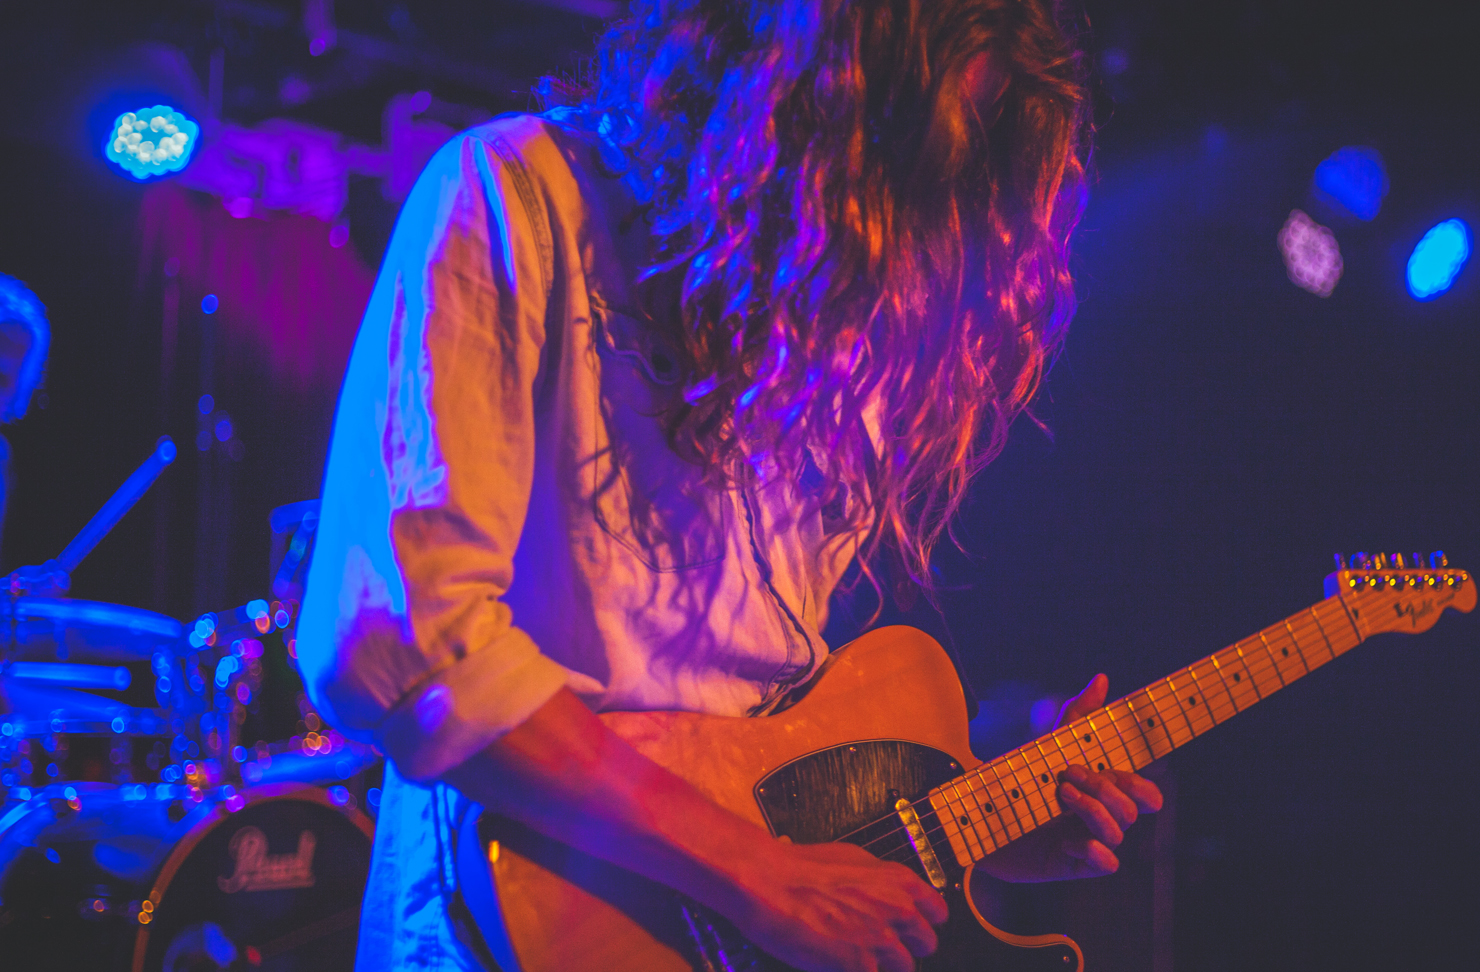 A musician on stage and playing guitar. Their face is covered by long, unruly hair. 